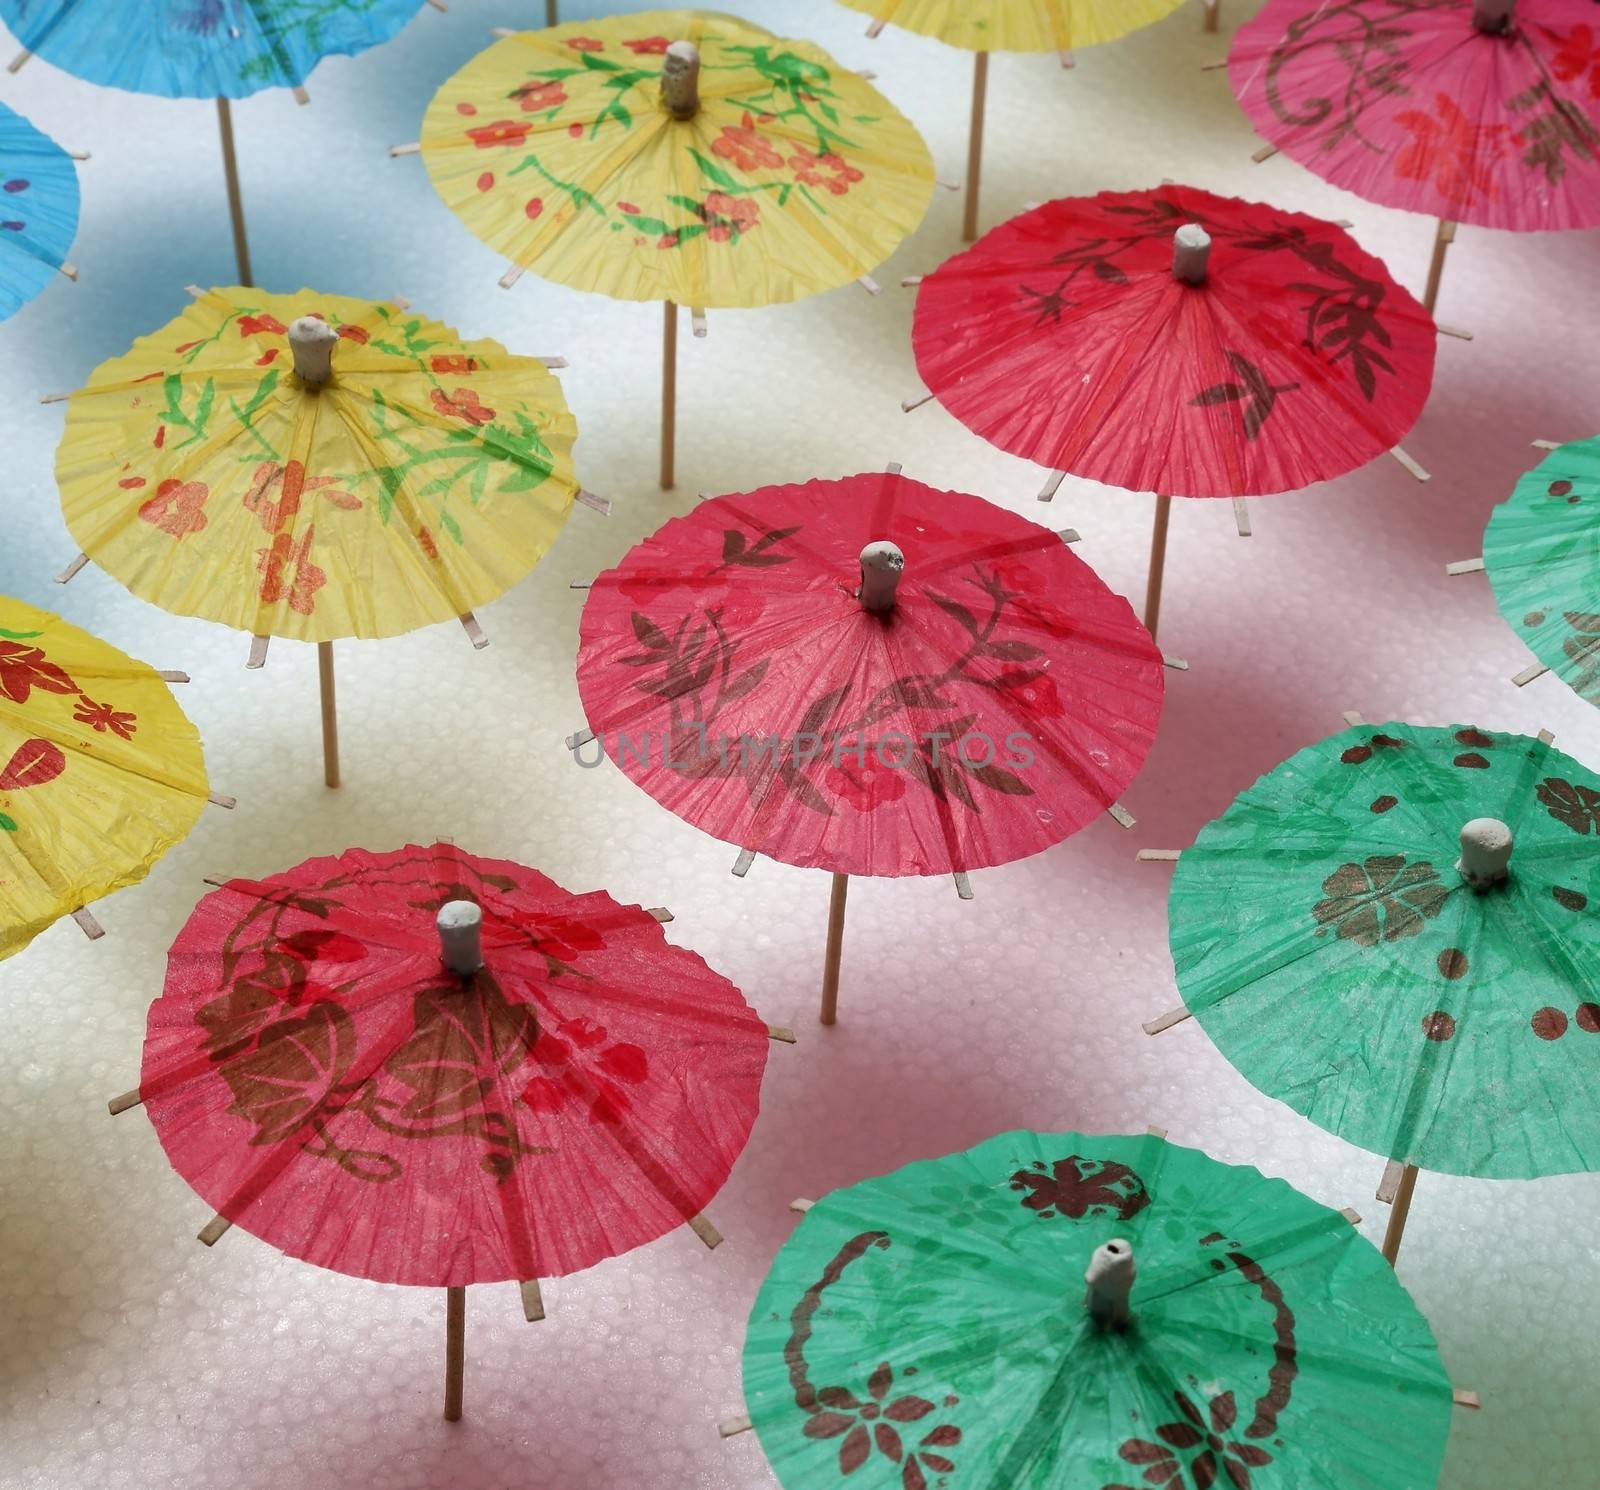 Cocktail umbrellas of different colors arranged in a pattern